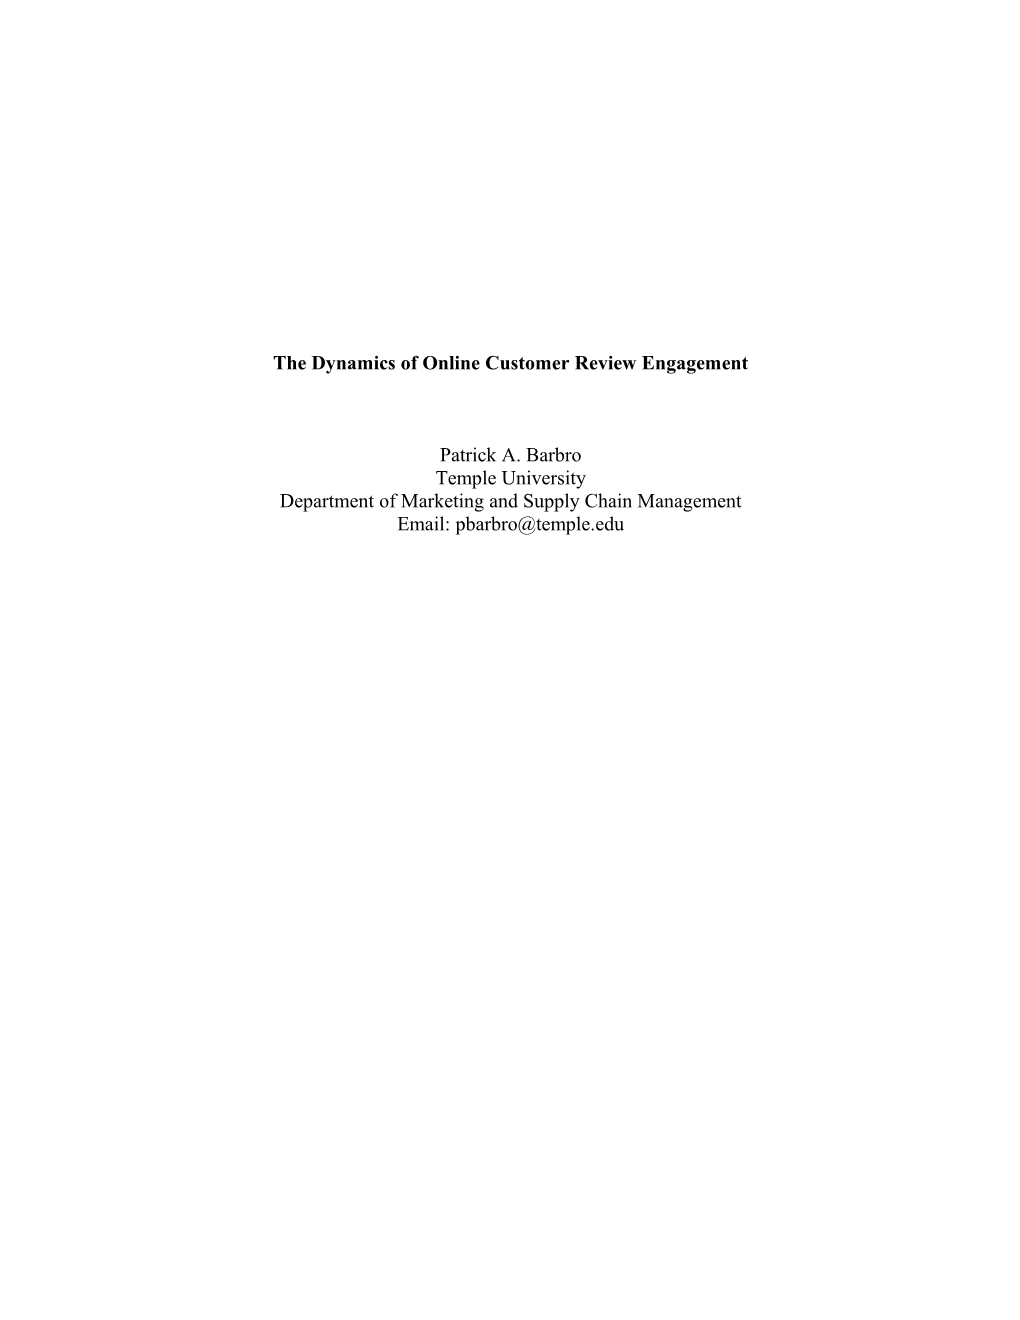 The Dynamics of Online Customer Review Engagement